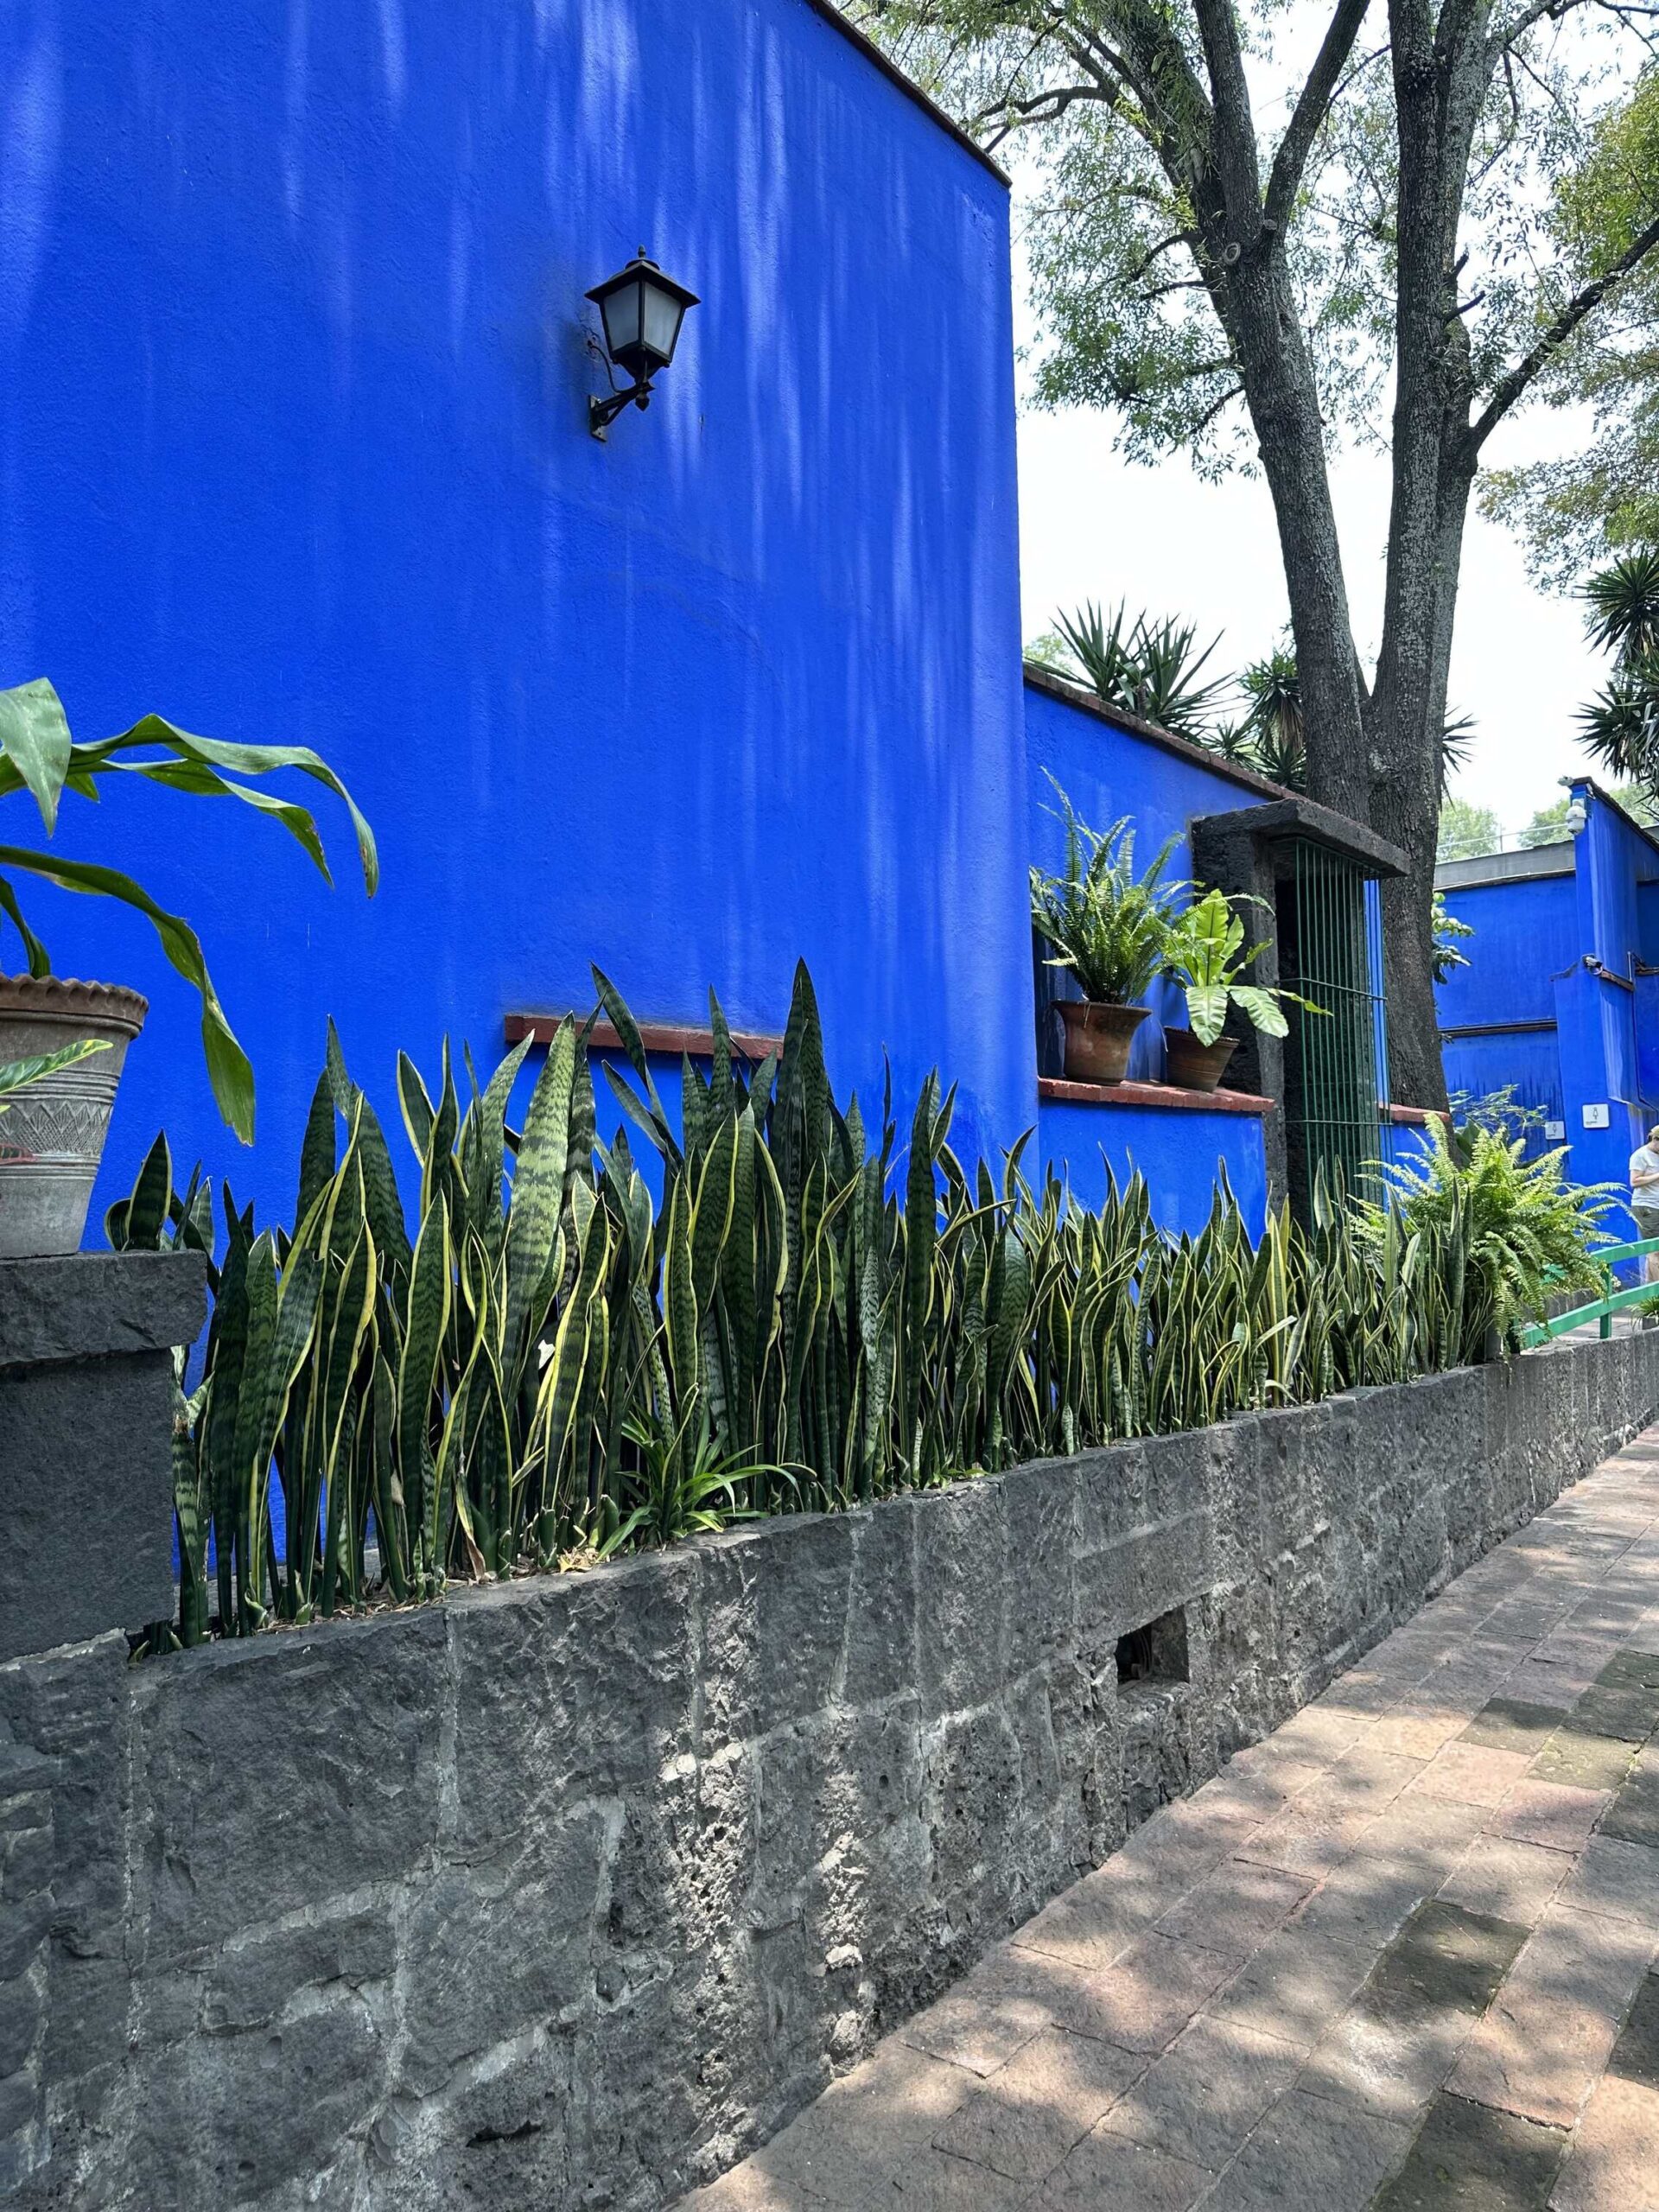 Museo Frida Kahlo, also known as La Casa Azul (The Blue House